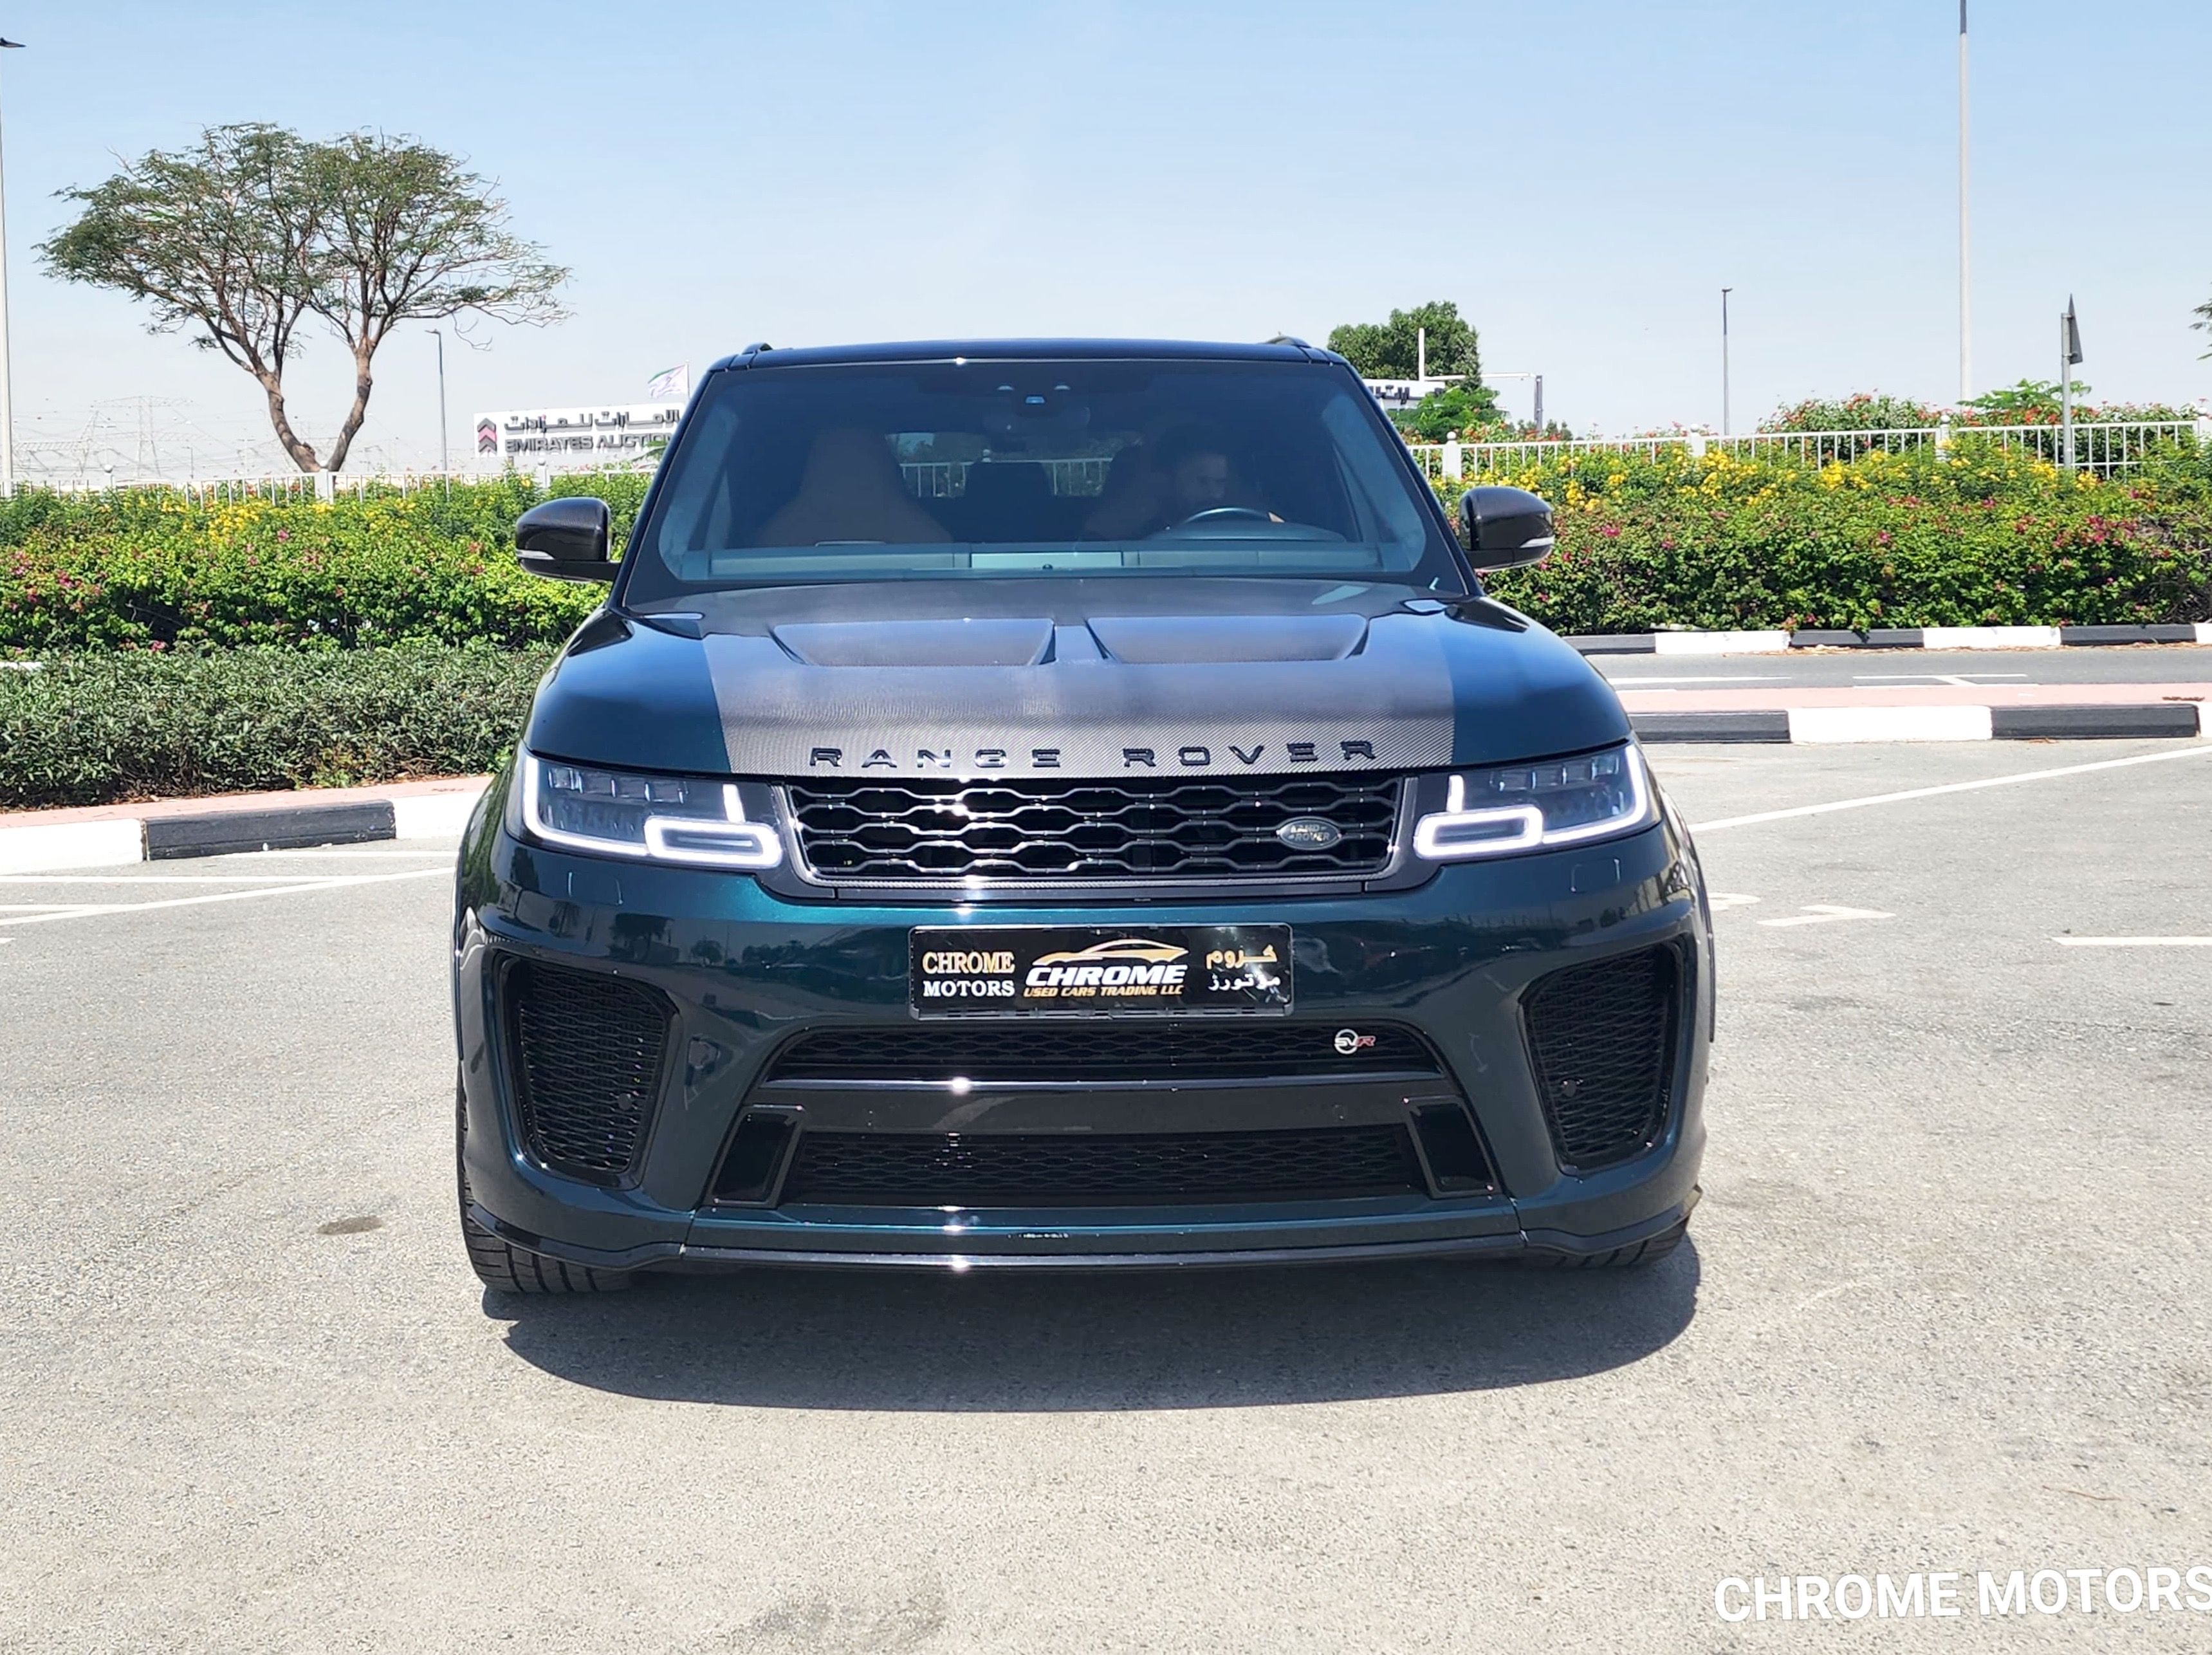 2022 LAND ROVER RANGE ROVER SPORT SVR,CARBON  EDITION 5DR SUV, 5L 8CYL PETROL, AUTOMATIC, ALL WHEEL DRIVE